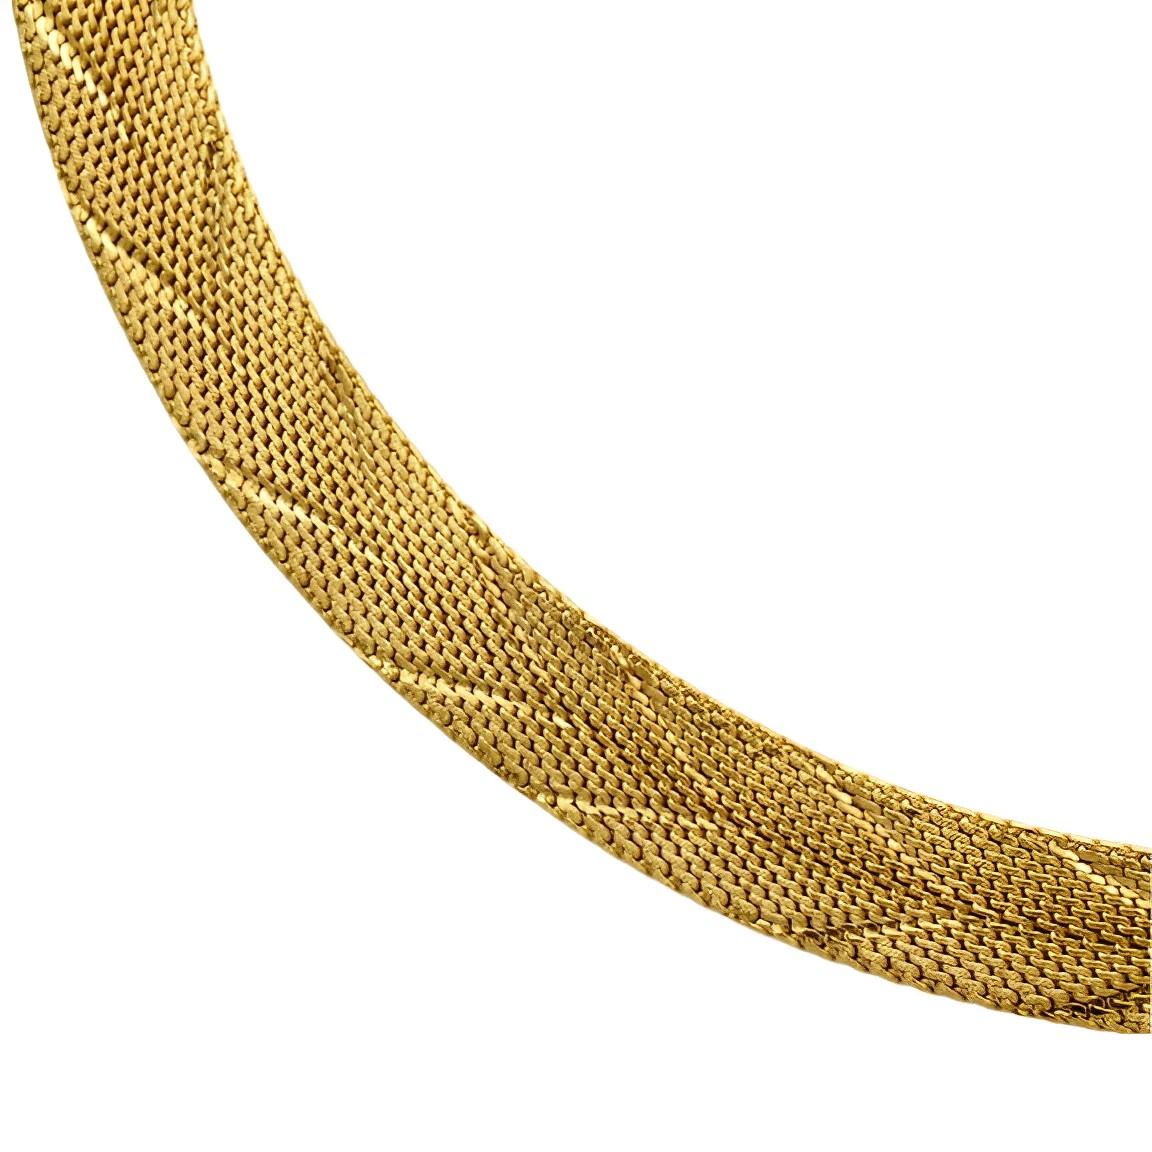 Gold Plated Egyptian Revival Chevron Collar Necklace circa 1980s For Sale 1